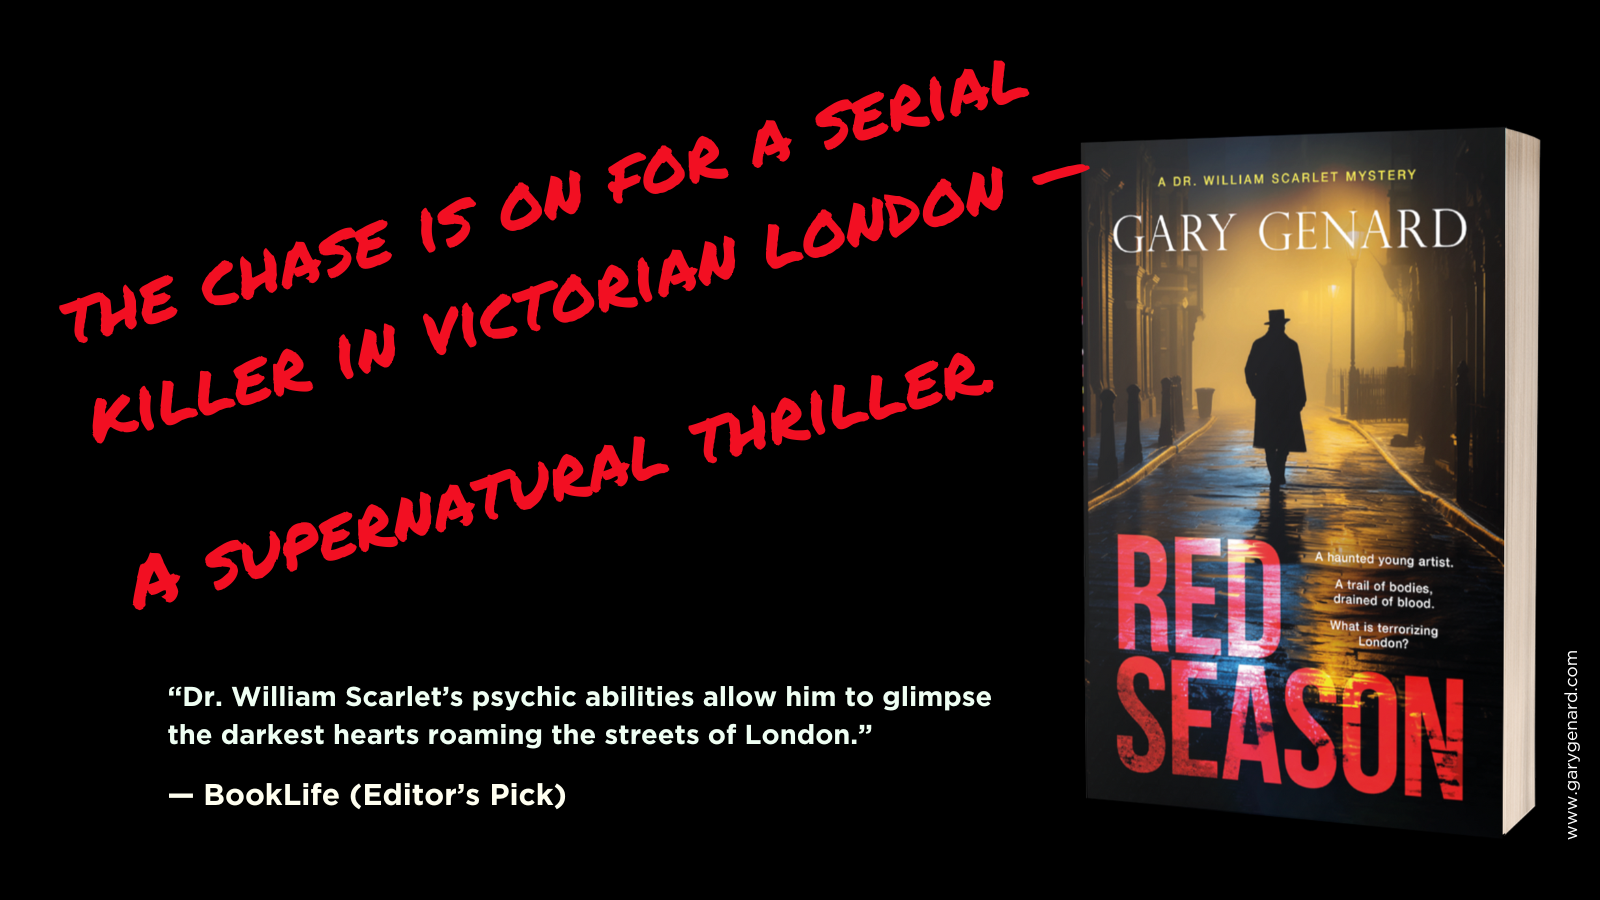 Red Season: Book #1 in the Dr. William Scarlet Mysteries, by Gary Genard.